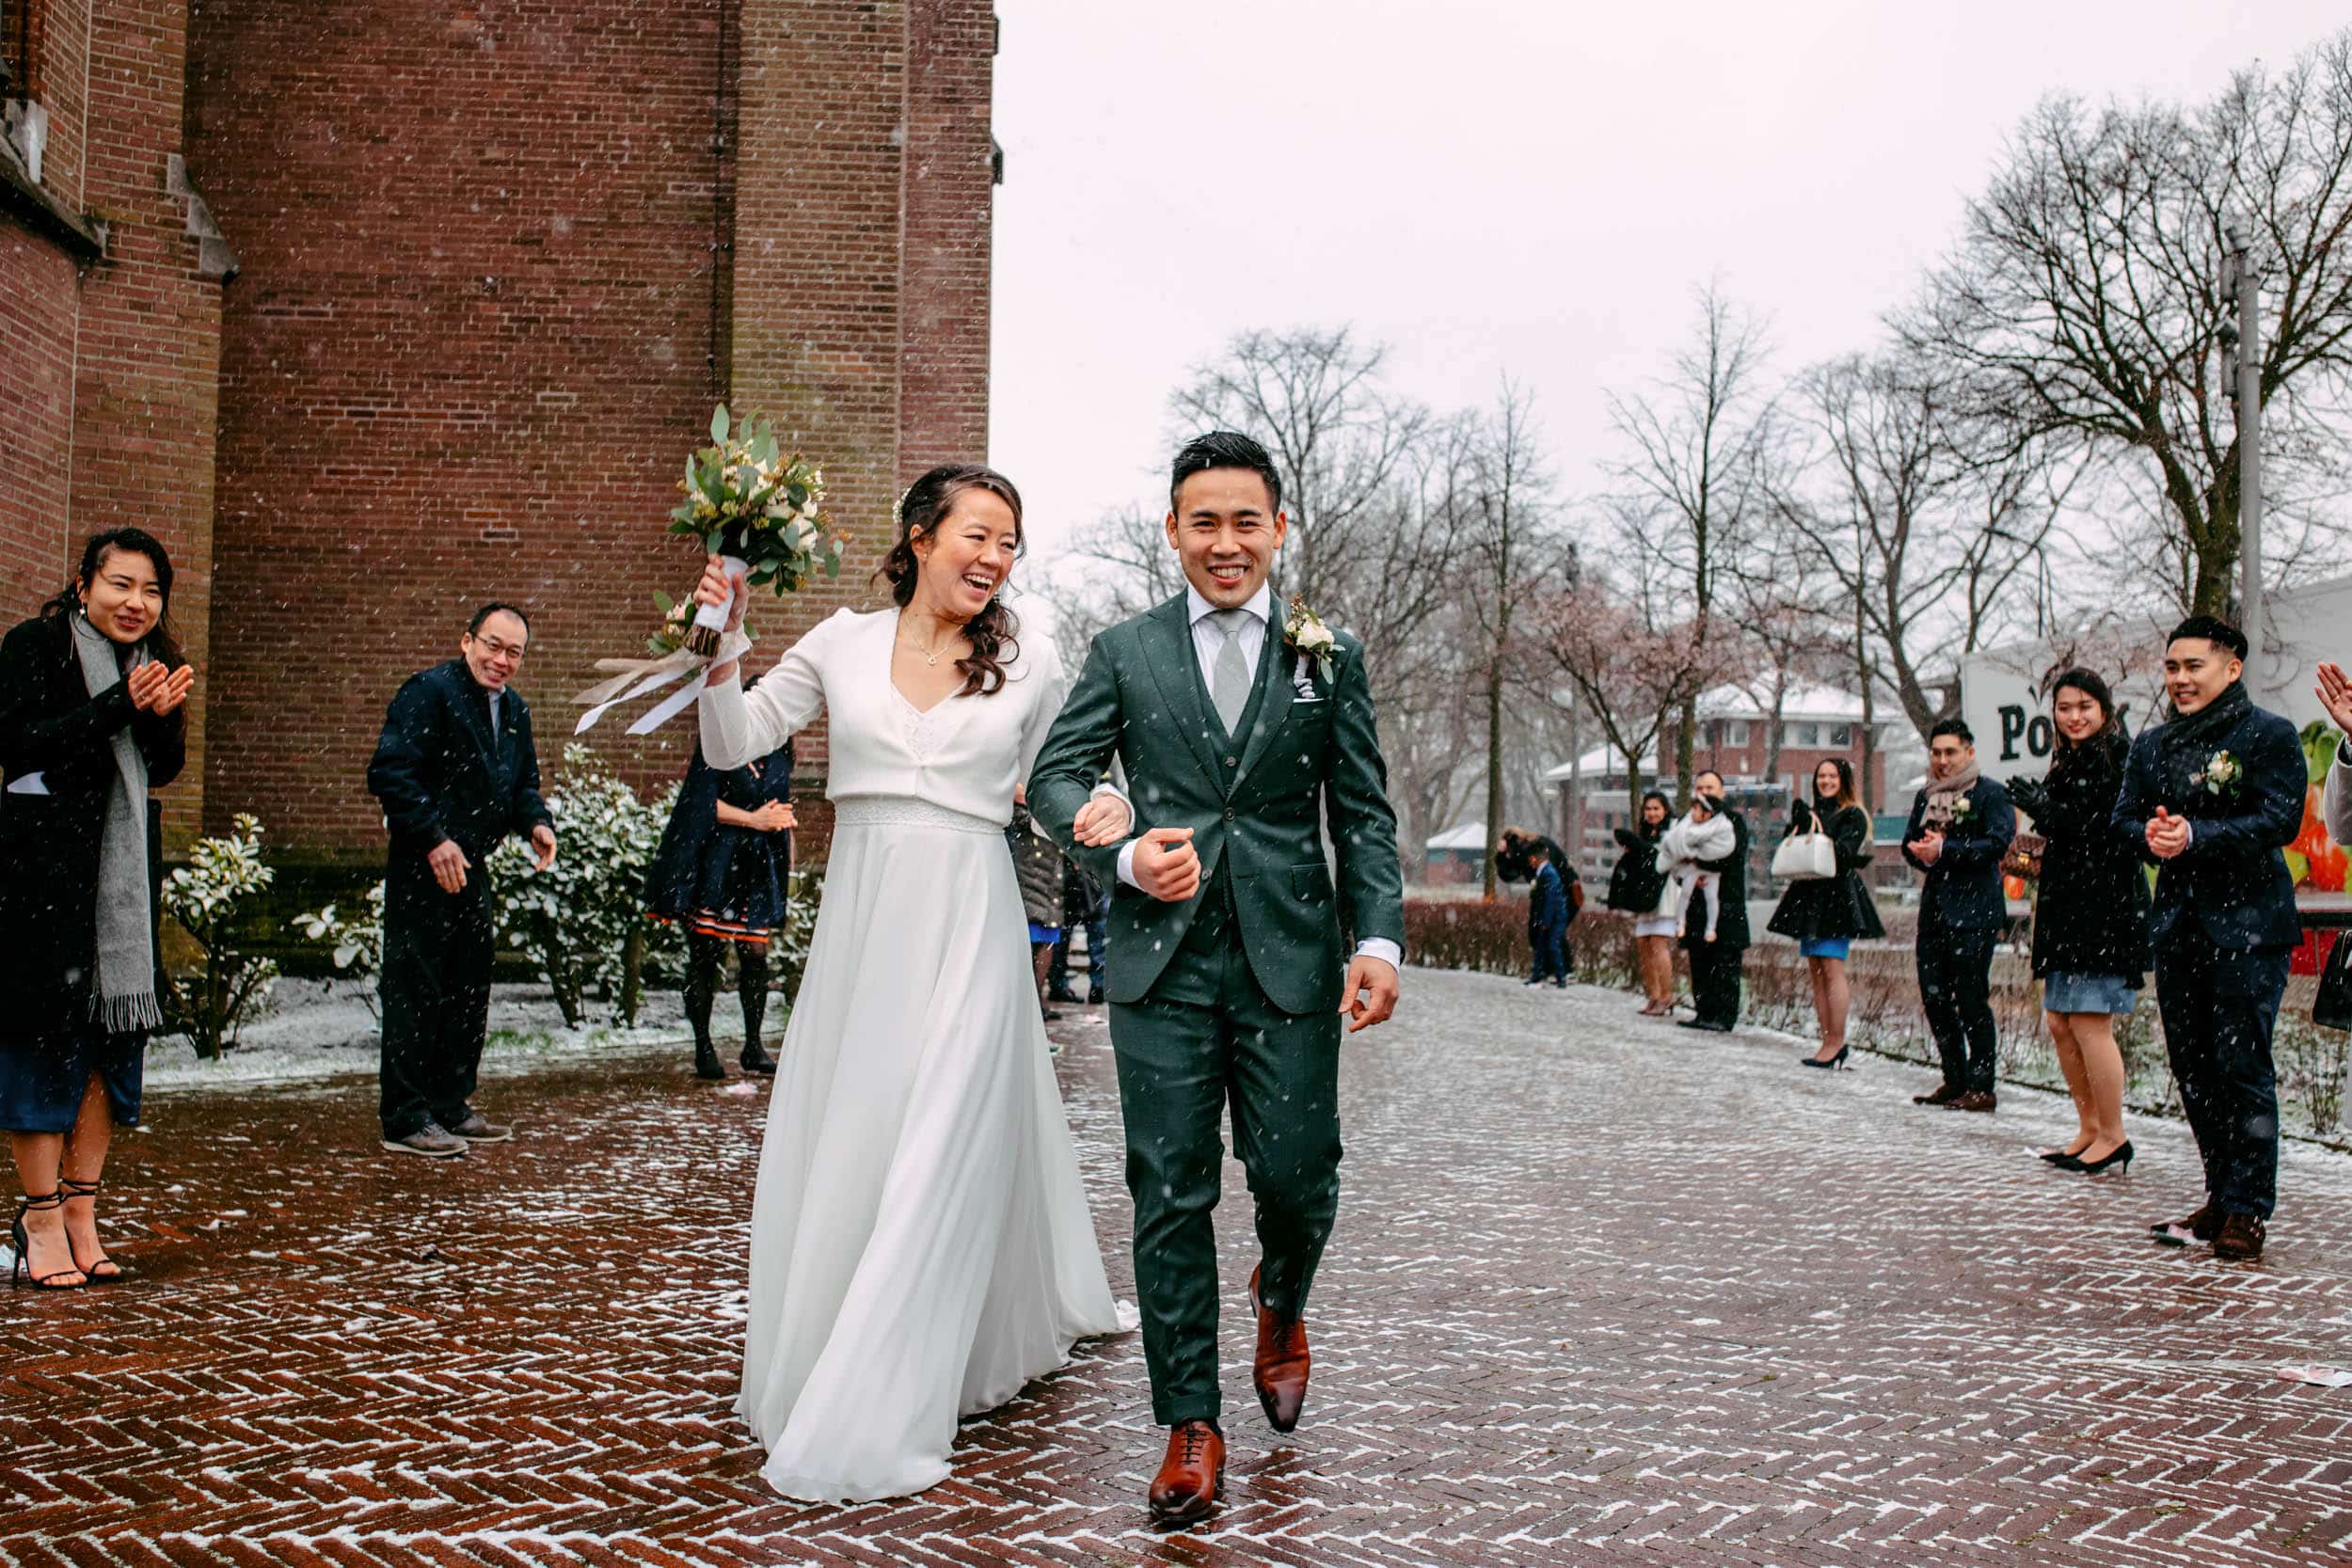 A couple walking across a stone walkway in the snow, with a wedding theme.